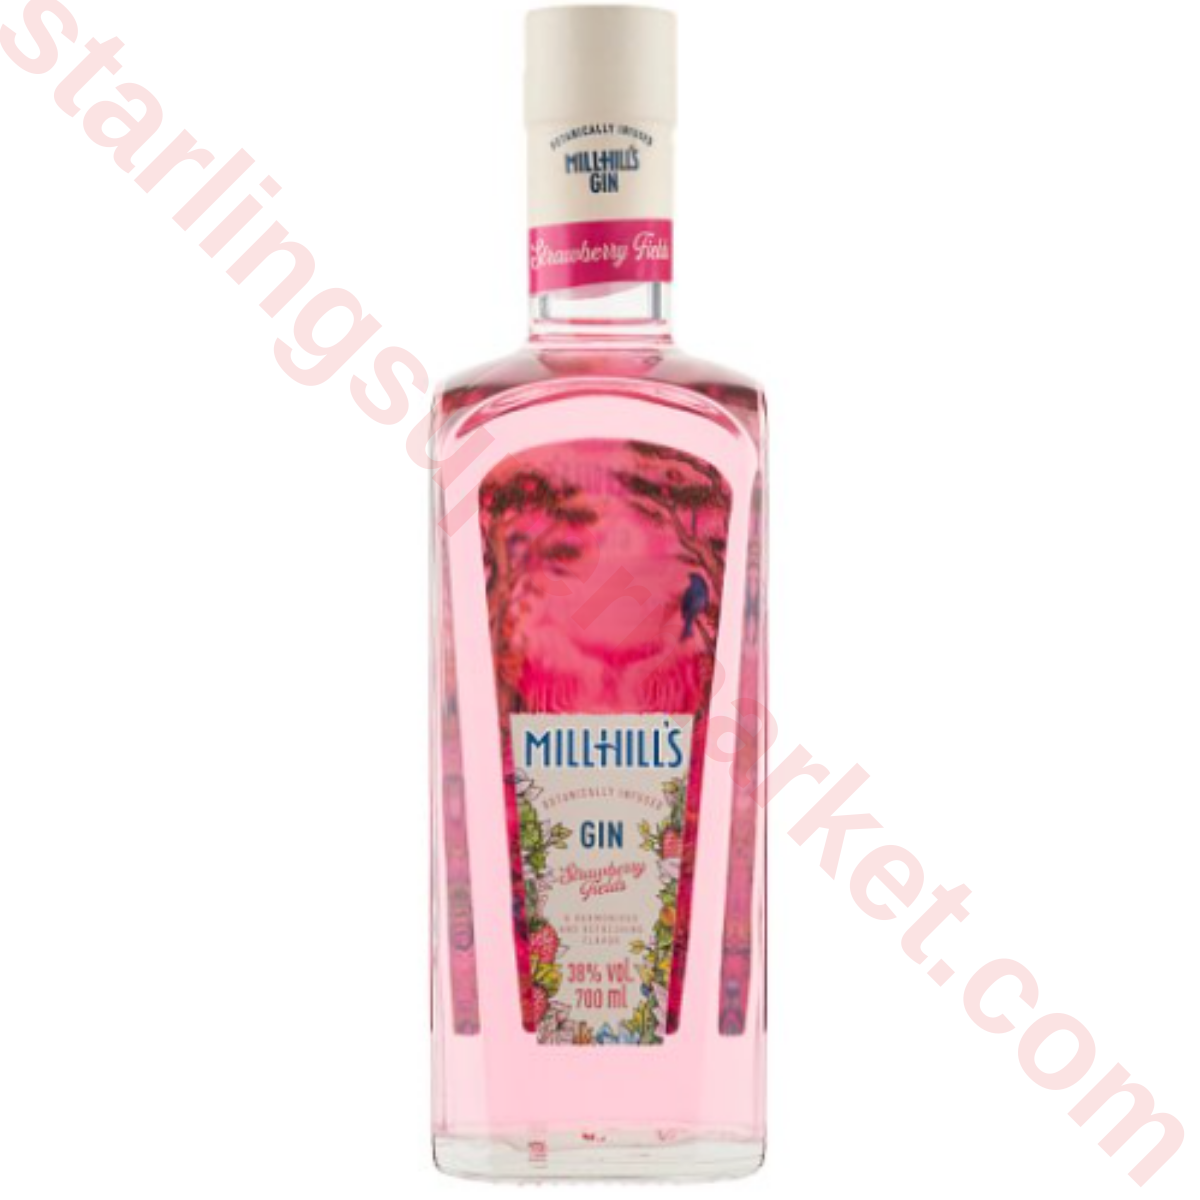 MILLHILLS LONDON DRY GIN STRAWBERRY 70 CL